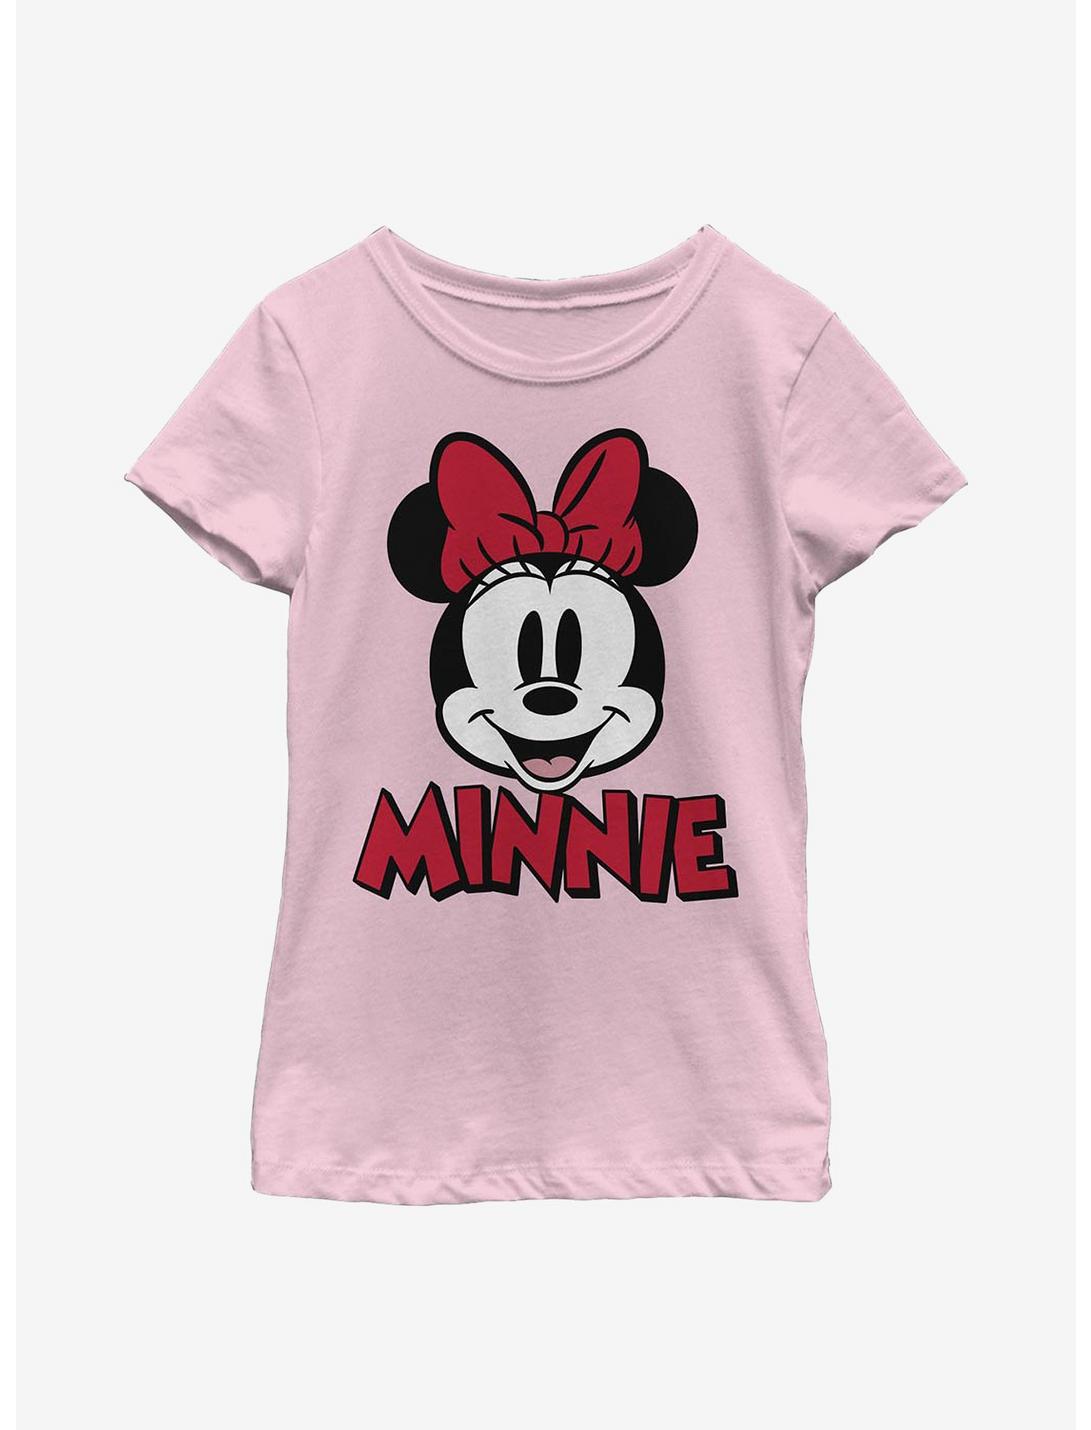 Disney Minnie Mouse Chenille Patch Youth Girls T-Shirt, PINK, hi-res